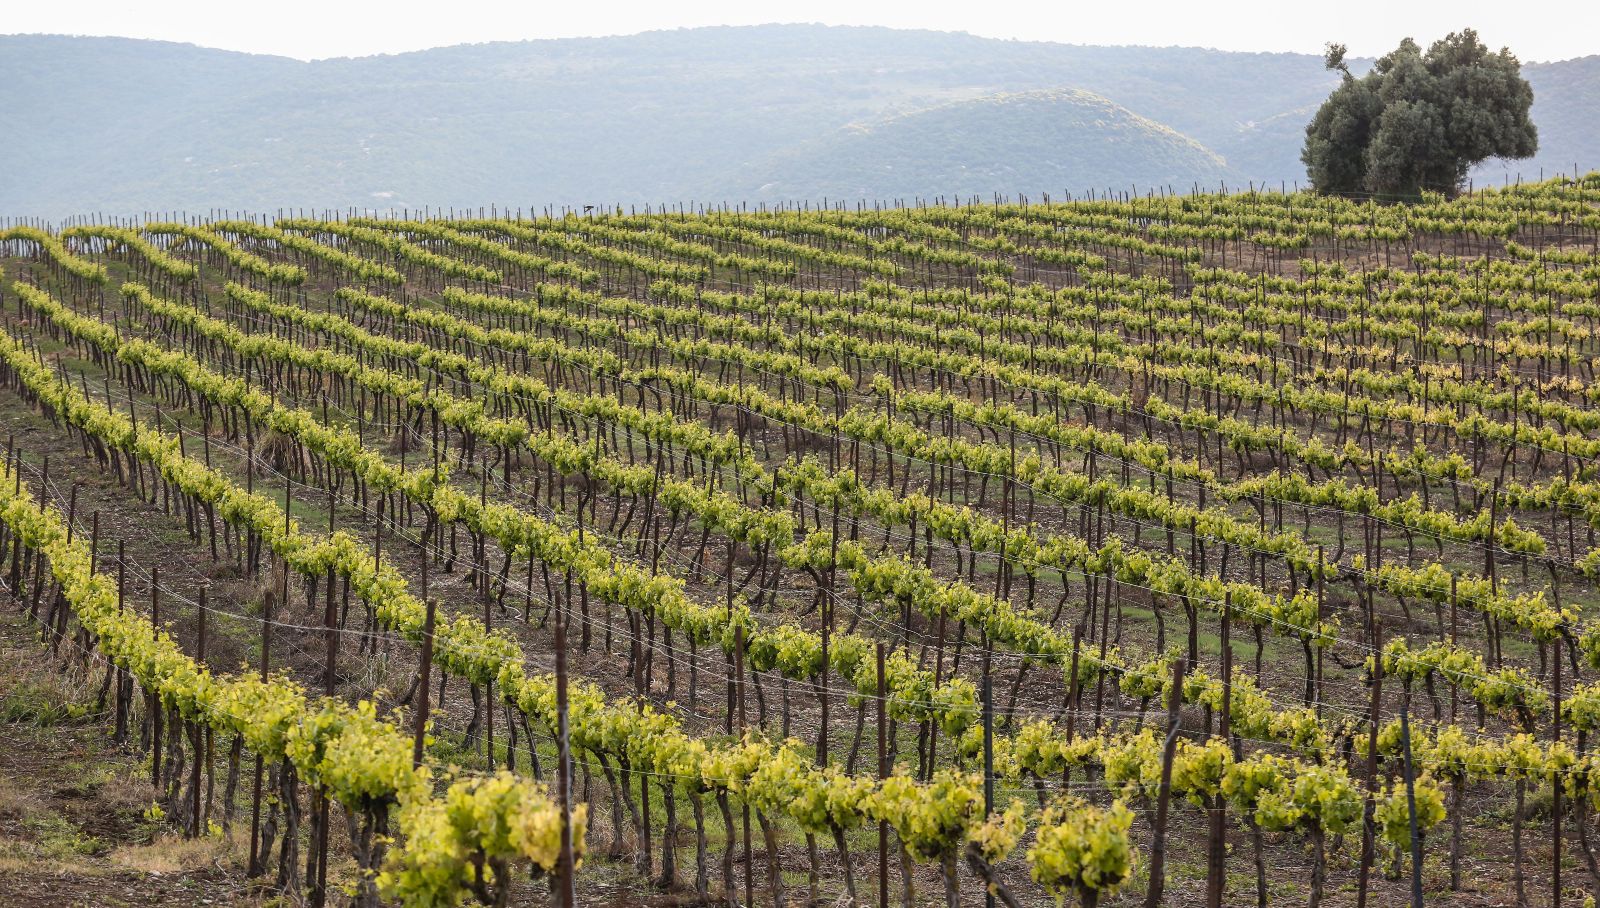 View of vineyards near the northern Israeli city of Tzfat. Photo by David Cohen/Flash90